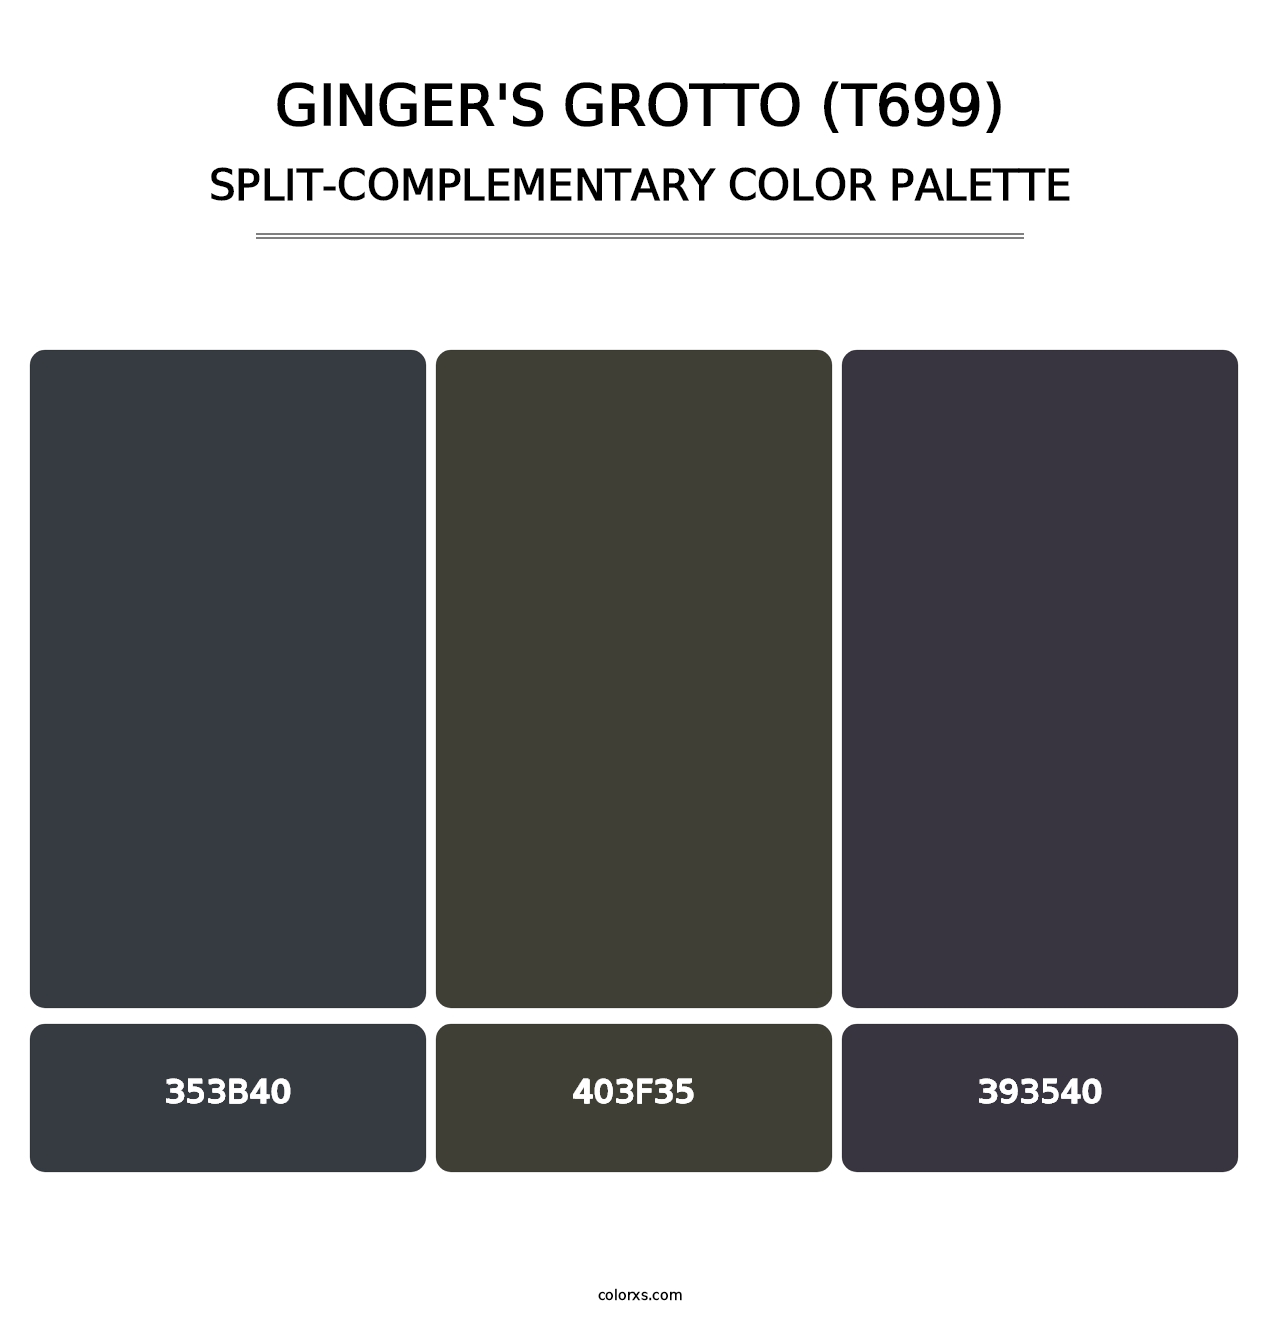 Ginger's Grotto (T699) - Split-Complementary Color Palette